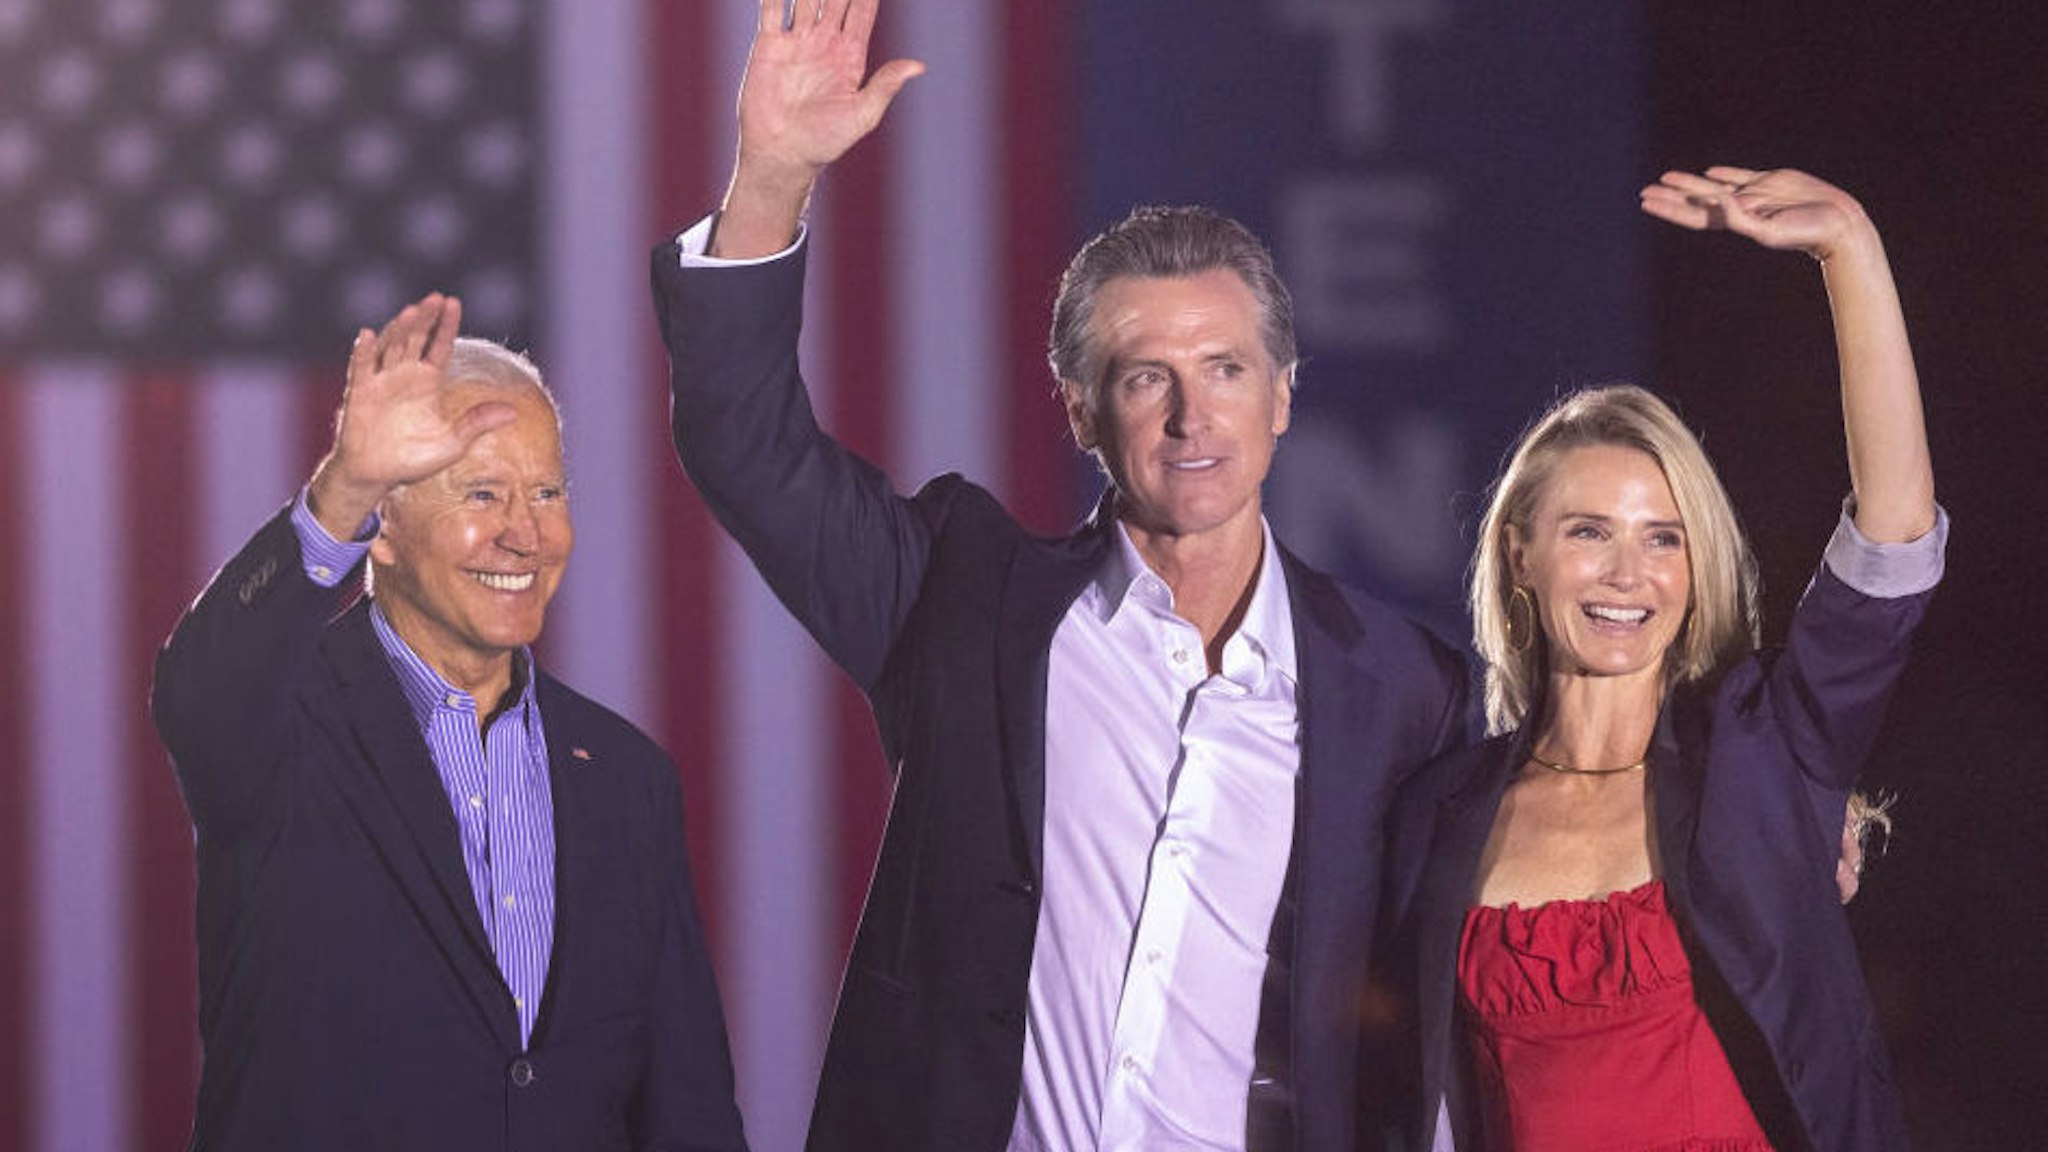 U.S. President Joe Biden, California Gov. Gavin Newsom and Jennifer Lynn Siebel Newsom wave to the crowd as they campaign to keep the governor in office at Long Beach City College on the eve of the last day of the special election to recall the governor on September 13, 2021 in Long Beach, California.